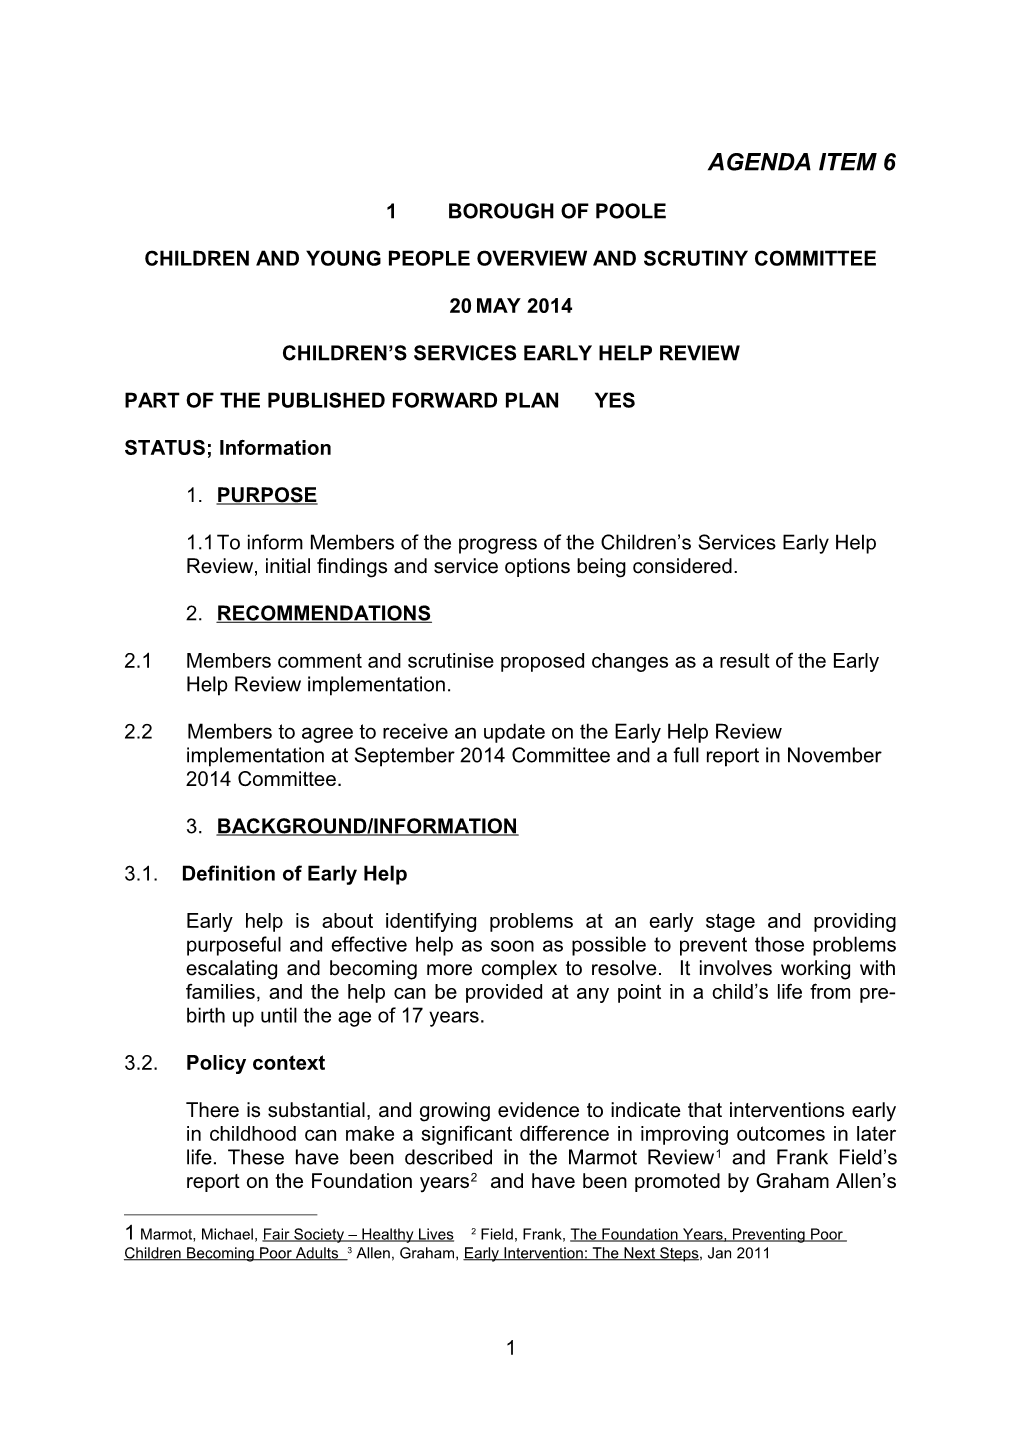 Children and Young People Overview and Scrutiny Committee